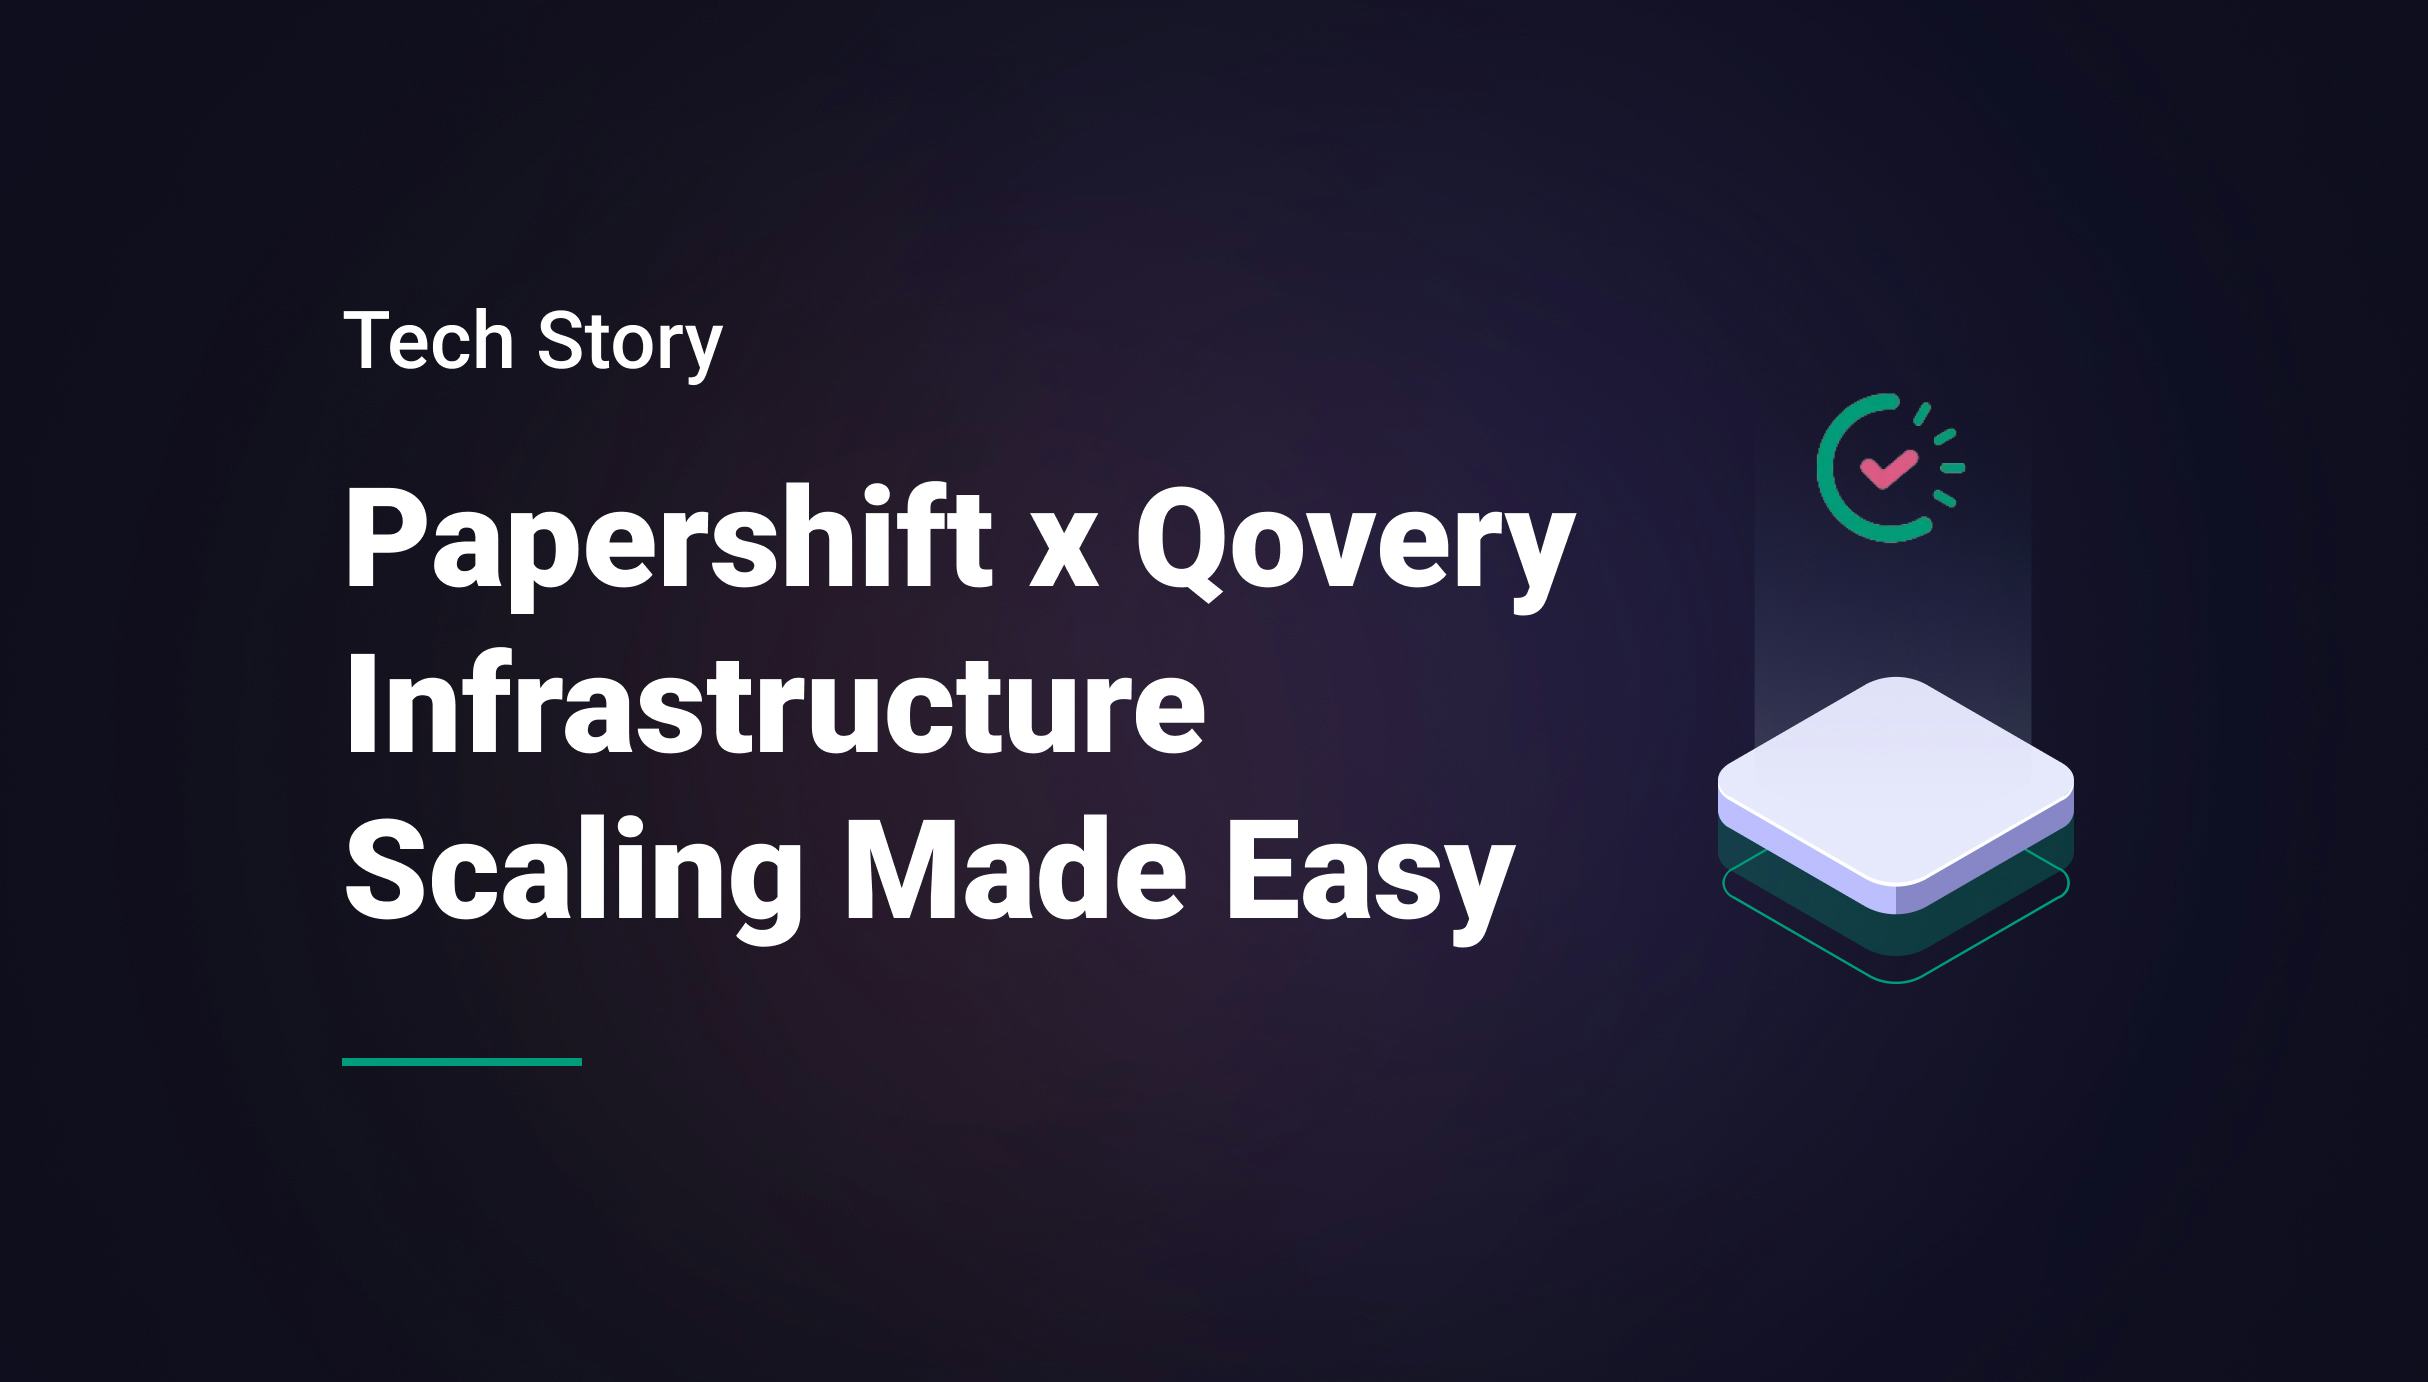 Tech Story: Papershift x Qovery Infrastructure Scaling Made Easy - Qovery